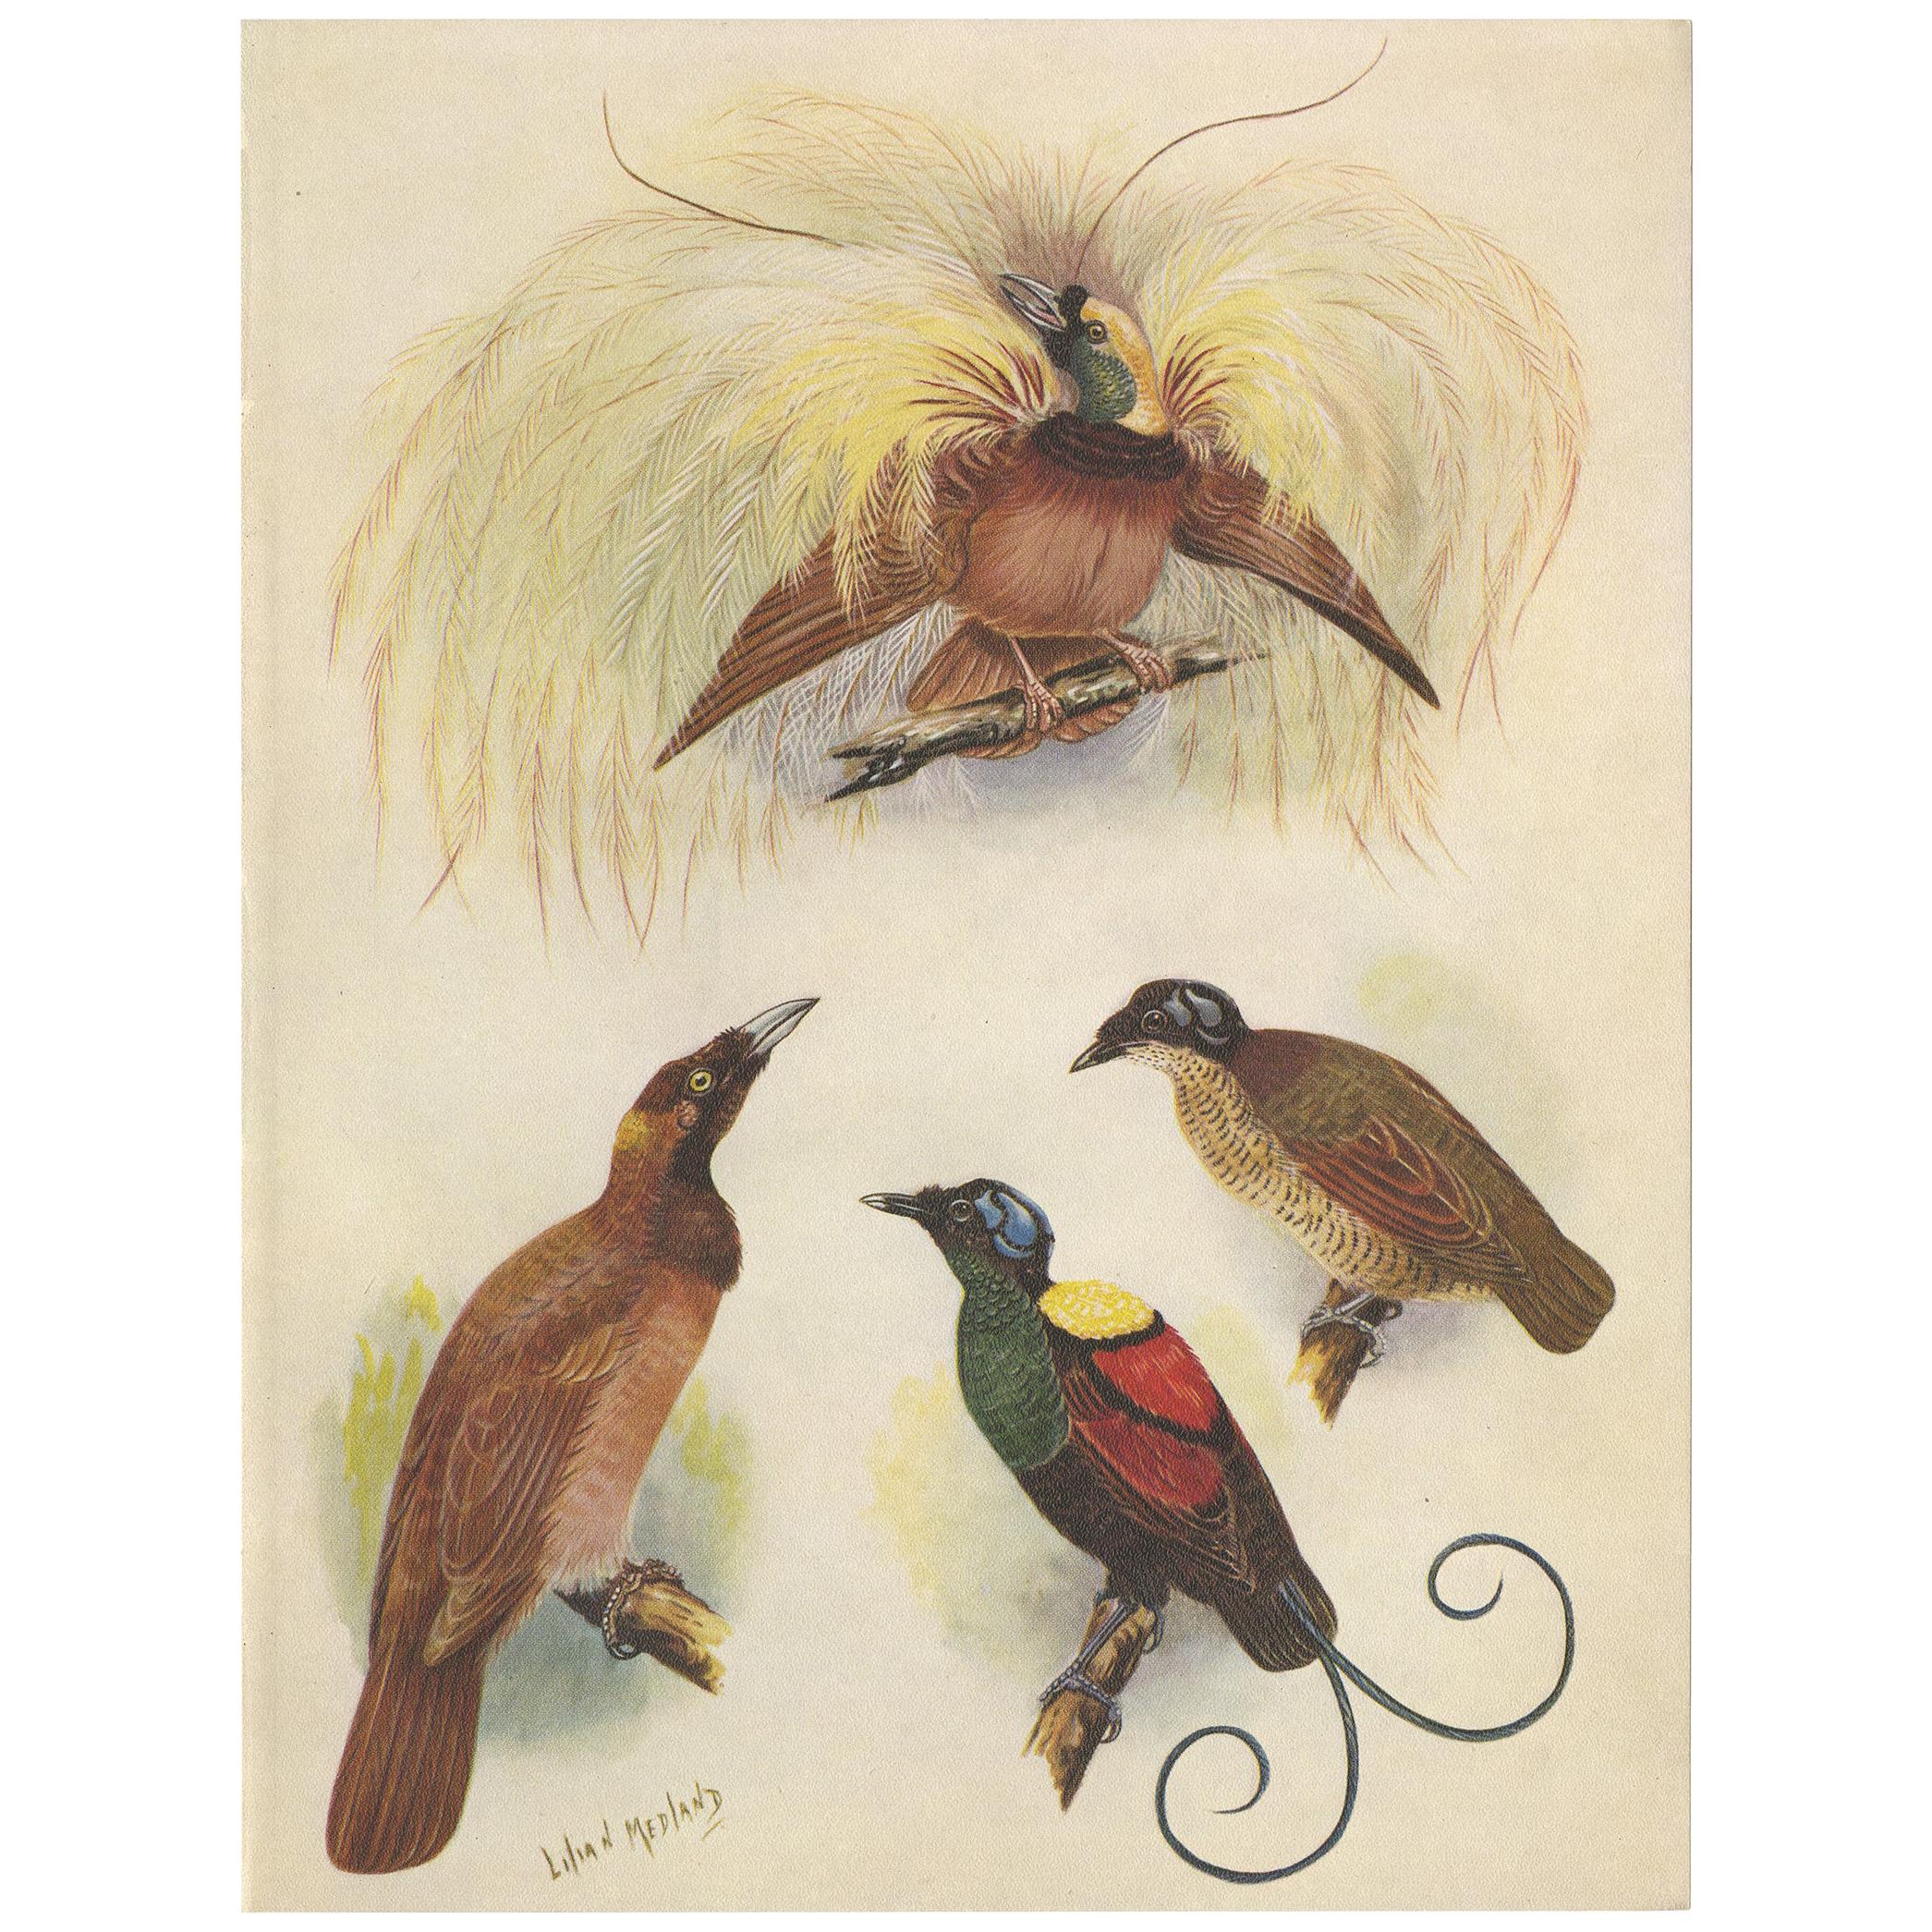 Antique Print of the Greater Bird of Paradise & the Bare-Headed Little King